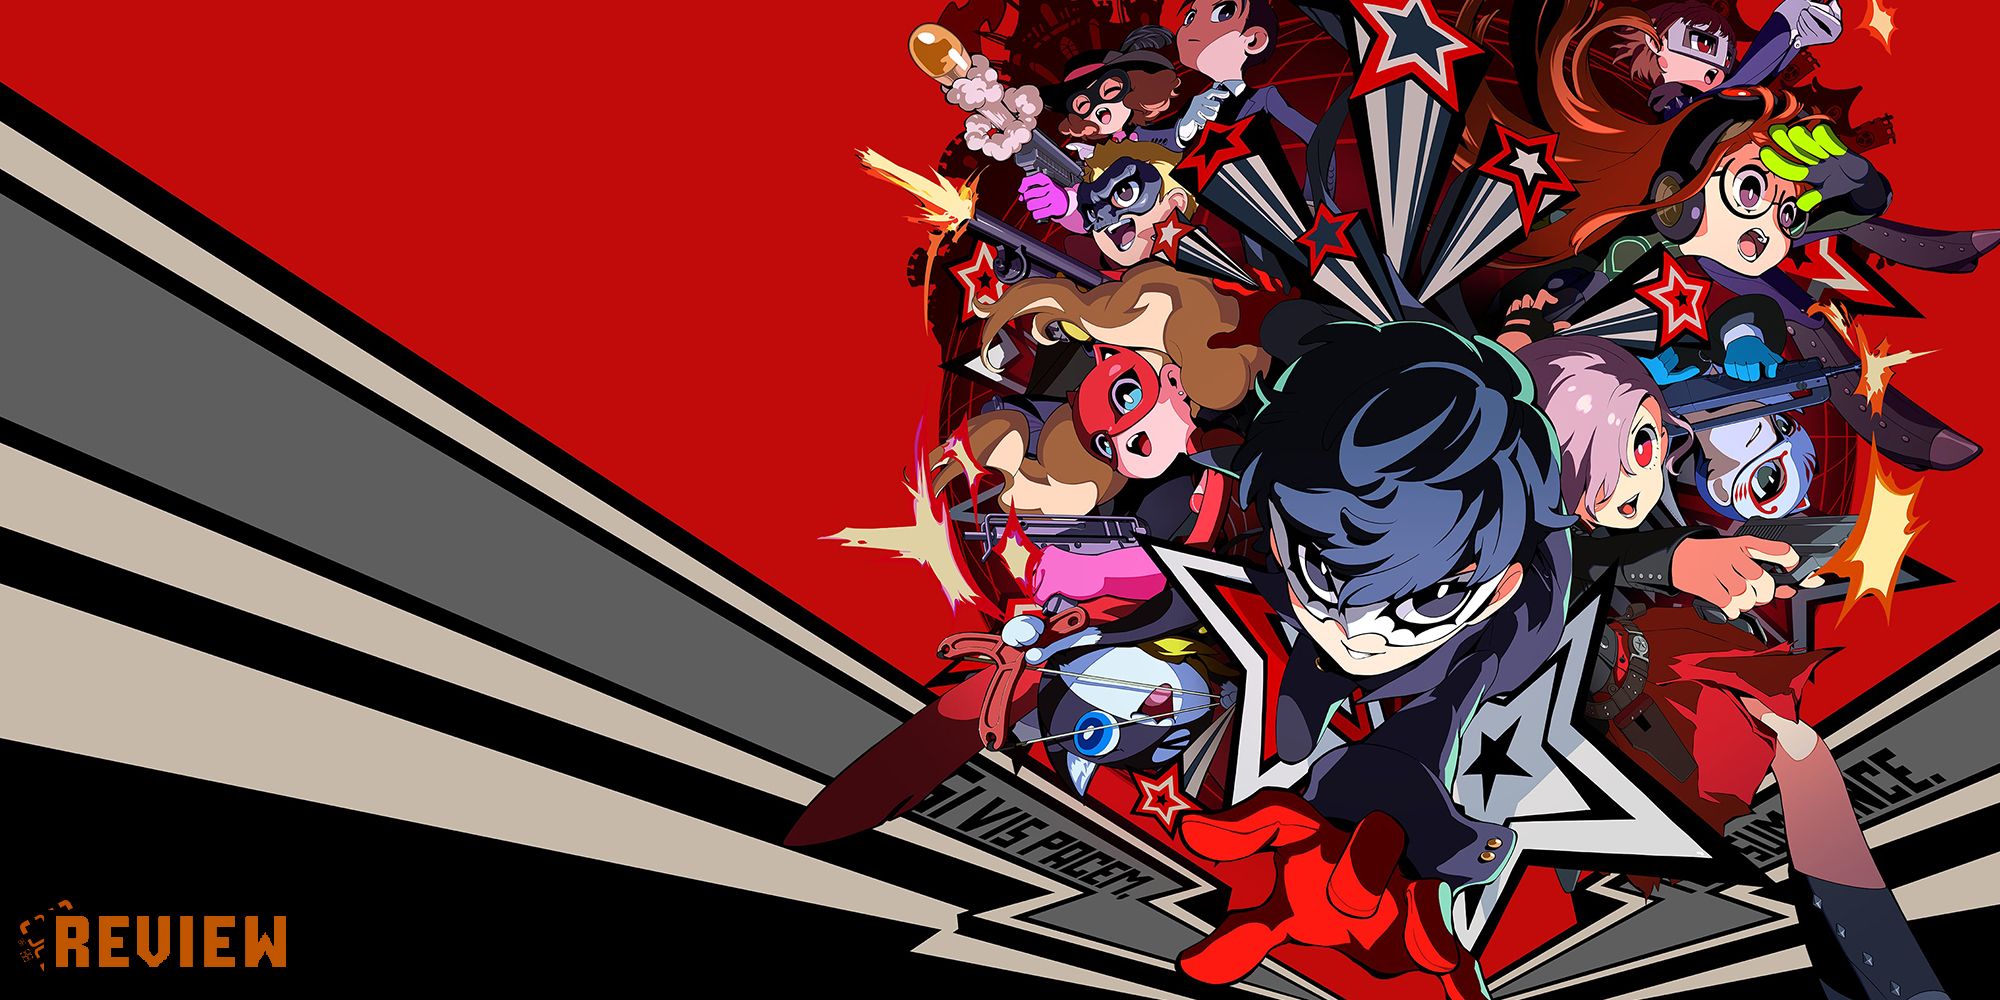 Persona 5 Tactica Review header showing phantom thieves on red background